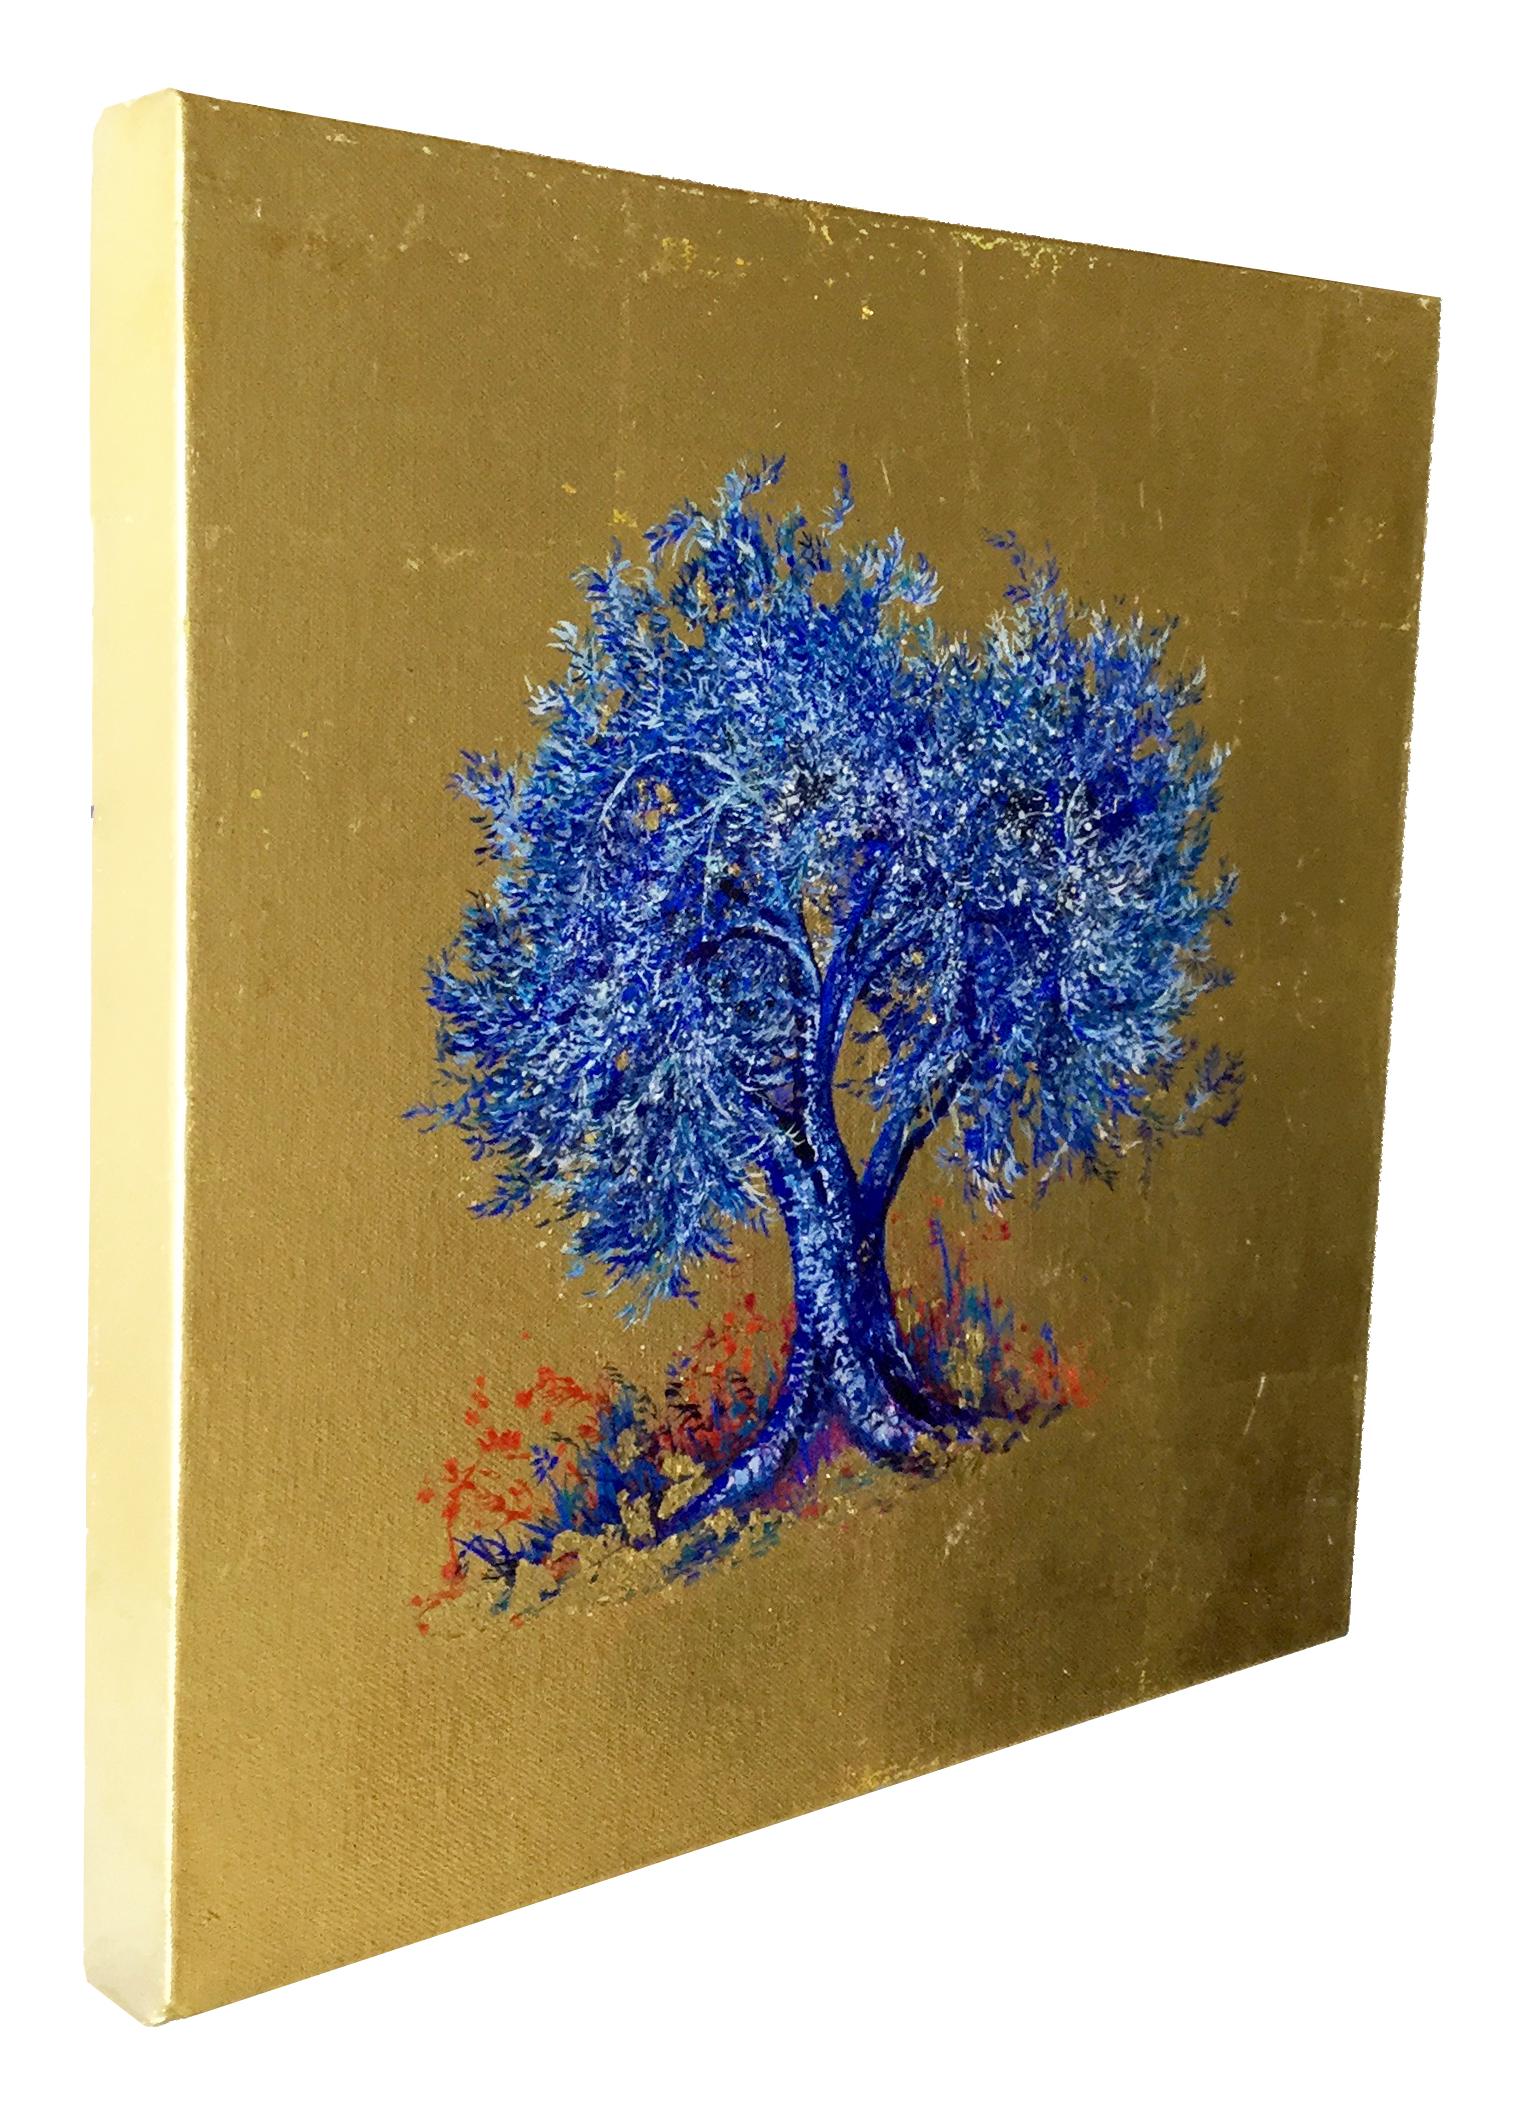 Indigo, Blossom Blue Tree, Contemporary Oil on Canvas Gold Leaf Painting  3